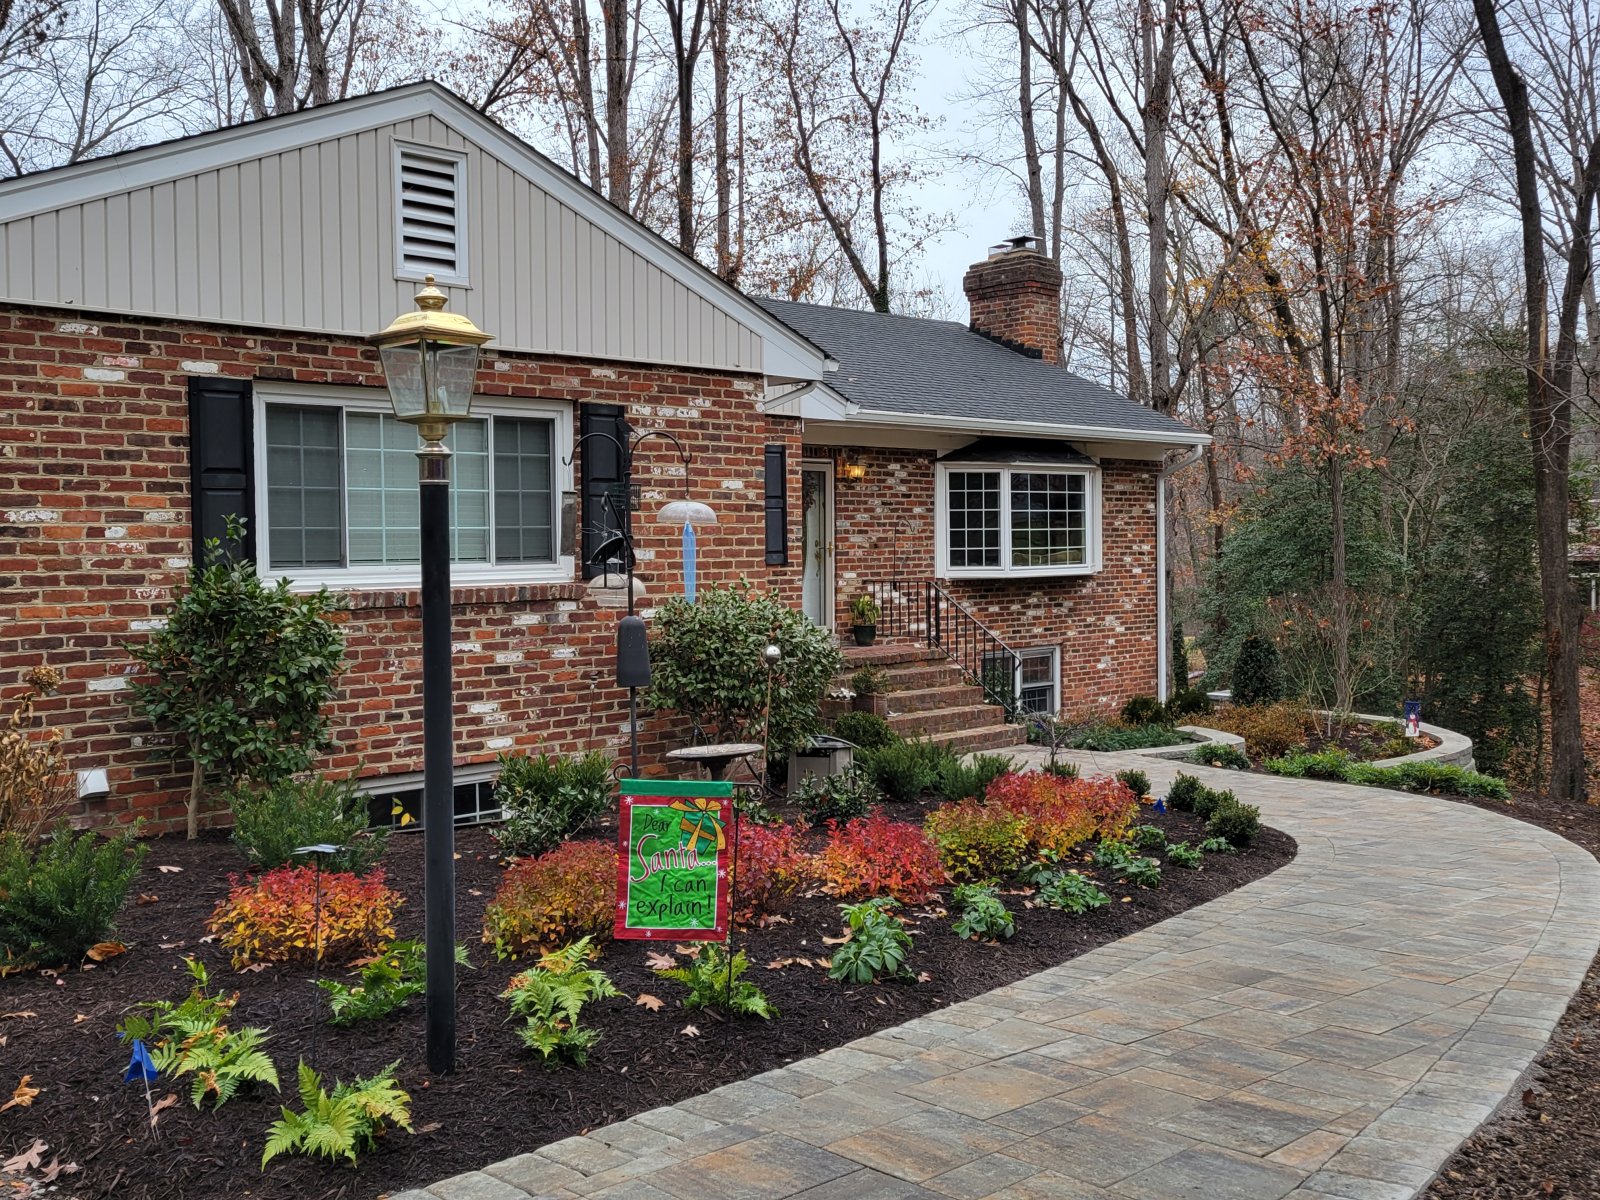 Just after completion. New Belgard paver walk, retaining wall and plantings.  : Pavers & Stone : Richmond VA Landscape Designer: Gardens by Monit, LLC: Monit Rosendale landscape designer Richmond and Charlottesville Virginia and Fredericksburg Virginia and Williamsburg Virginia